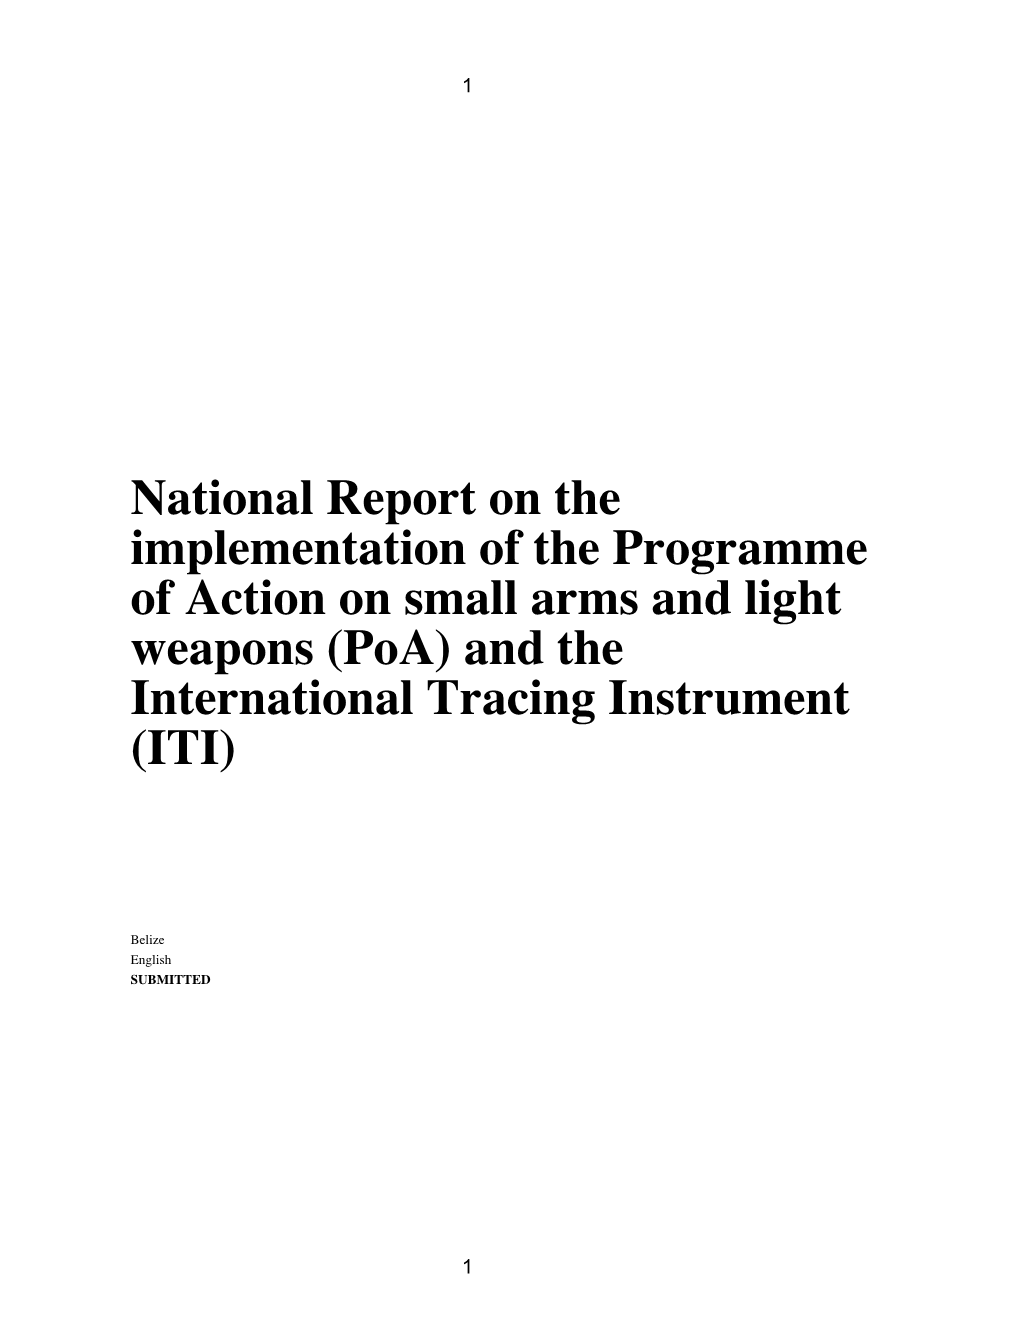 National Report on the Implementation of the Programme of Action on Small Arms and Light Weapons (Poa) and the International Tracing Instrument (ITI)